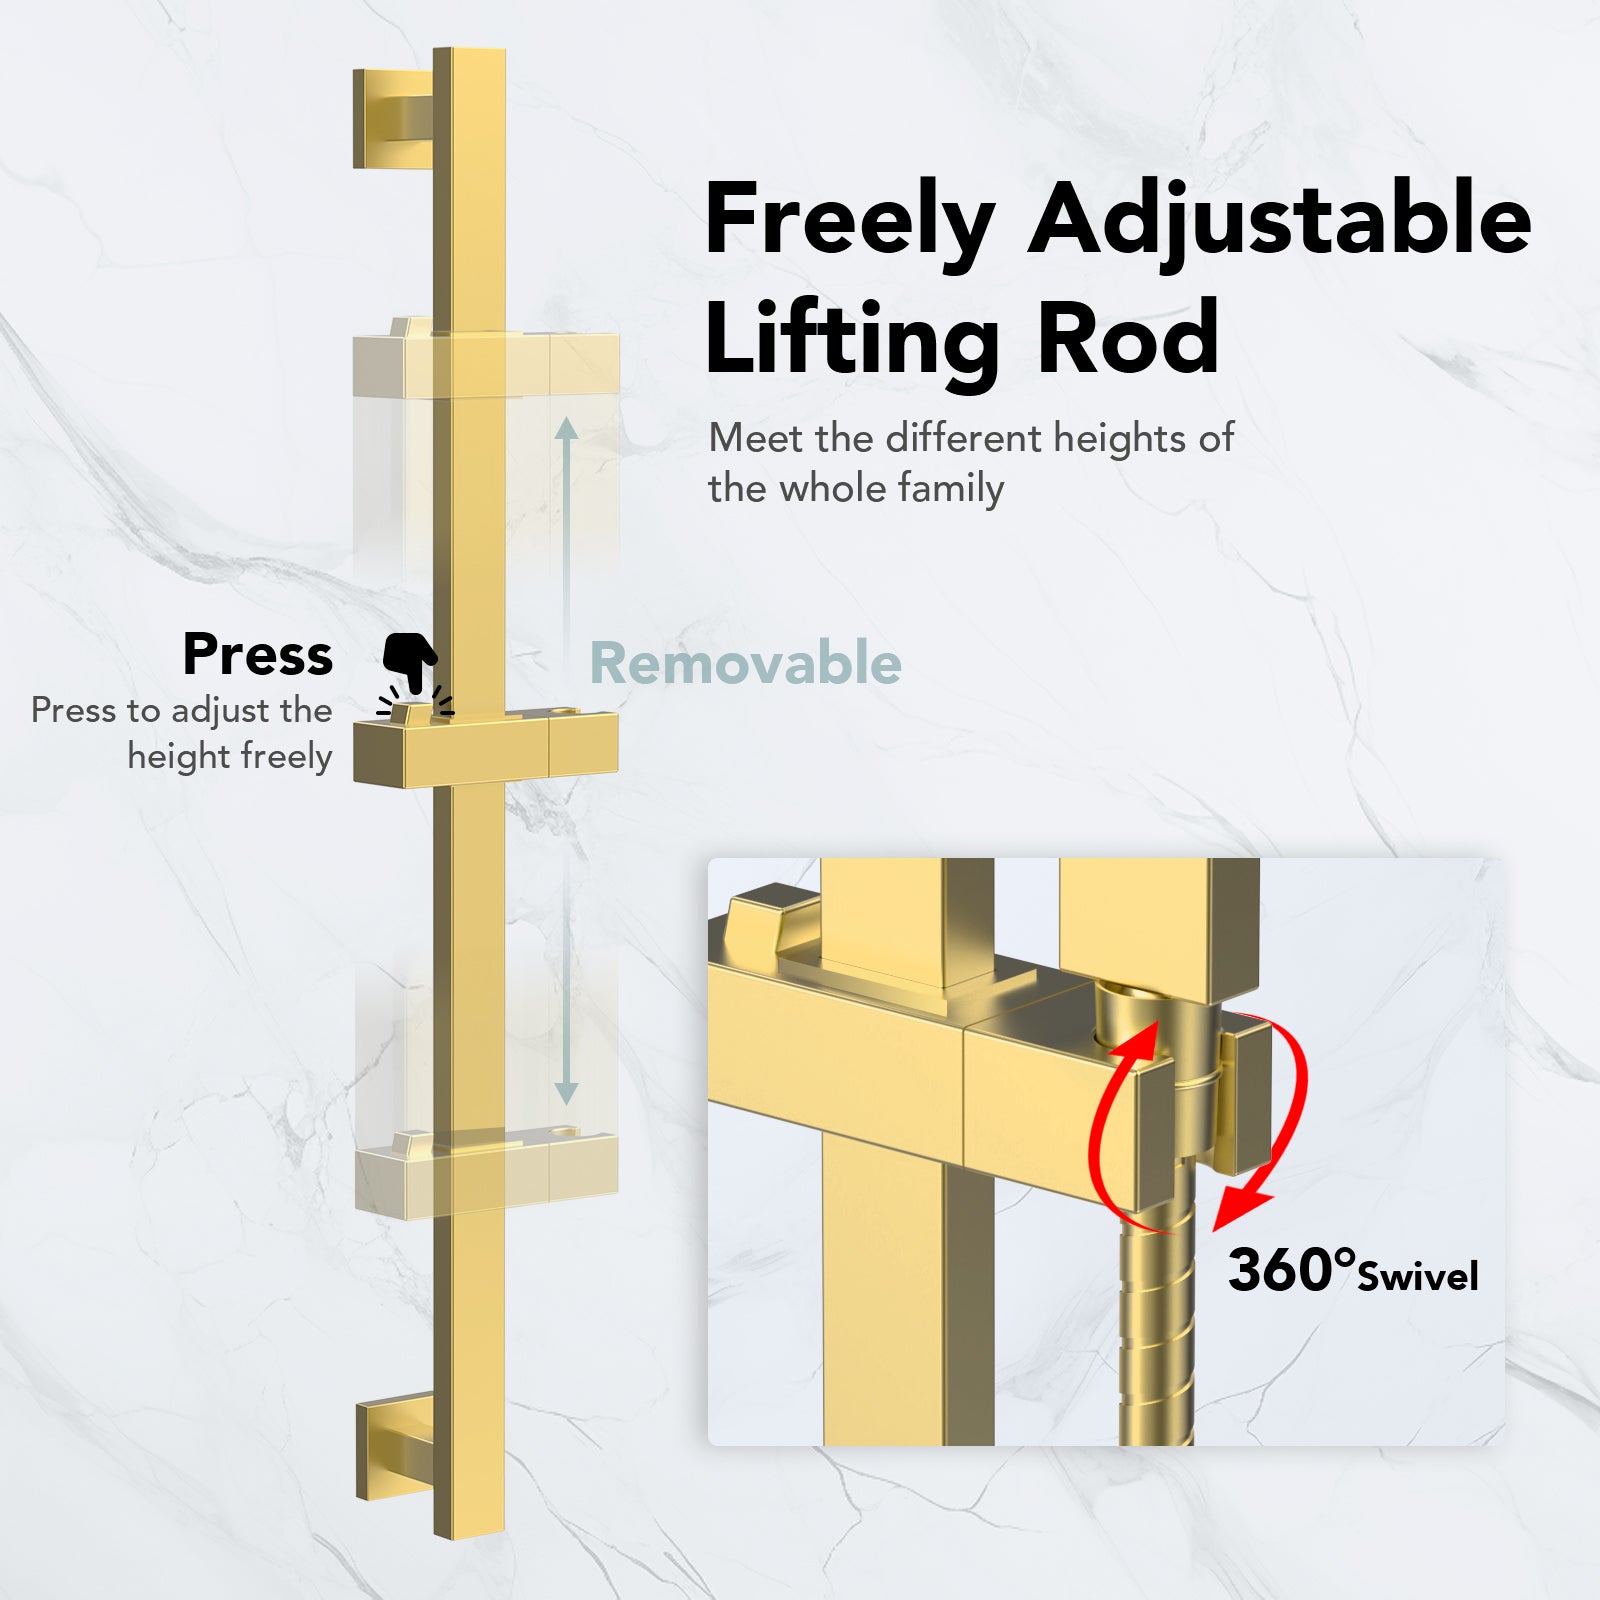 Details of the multi-height adjustable shower lift bar